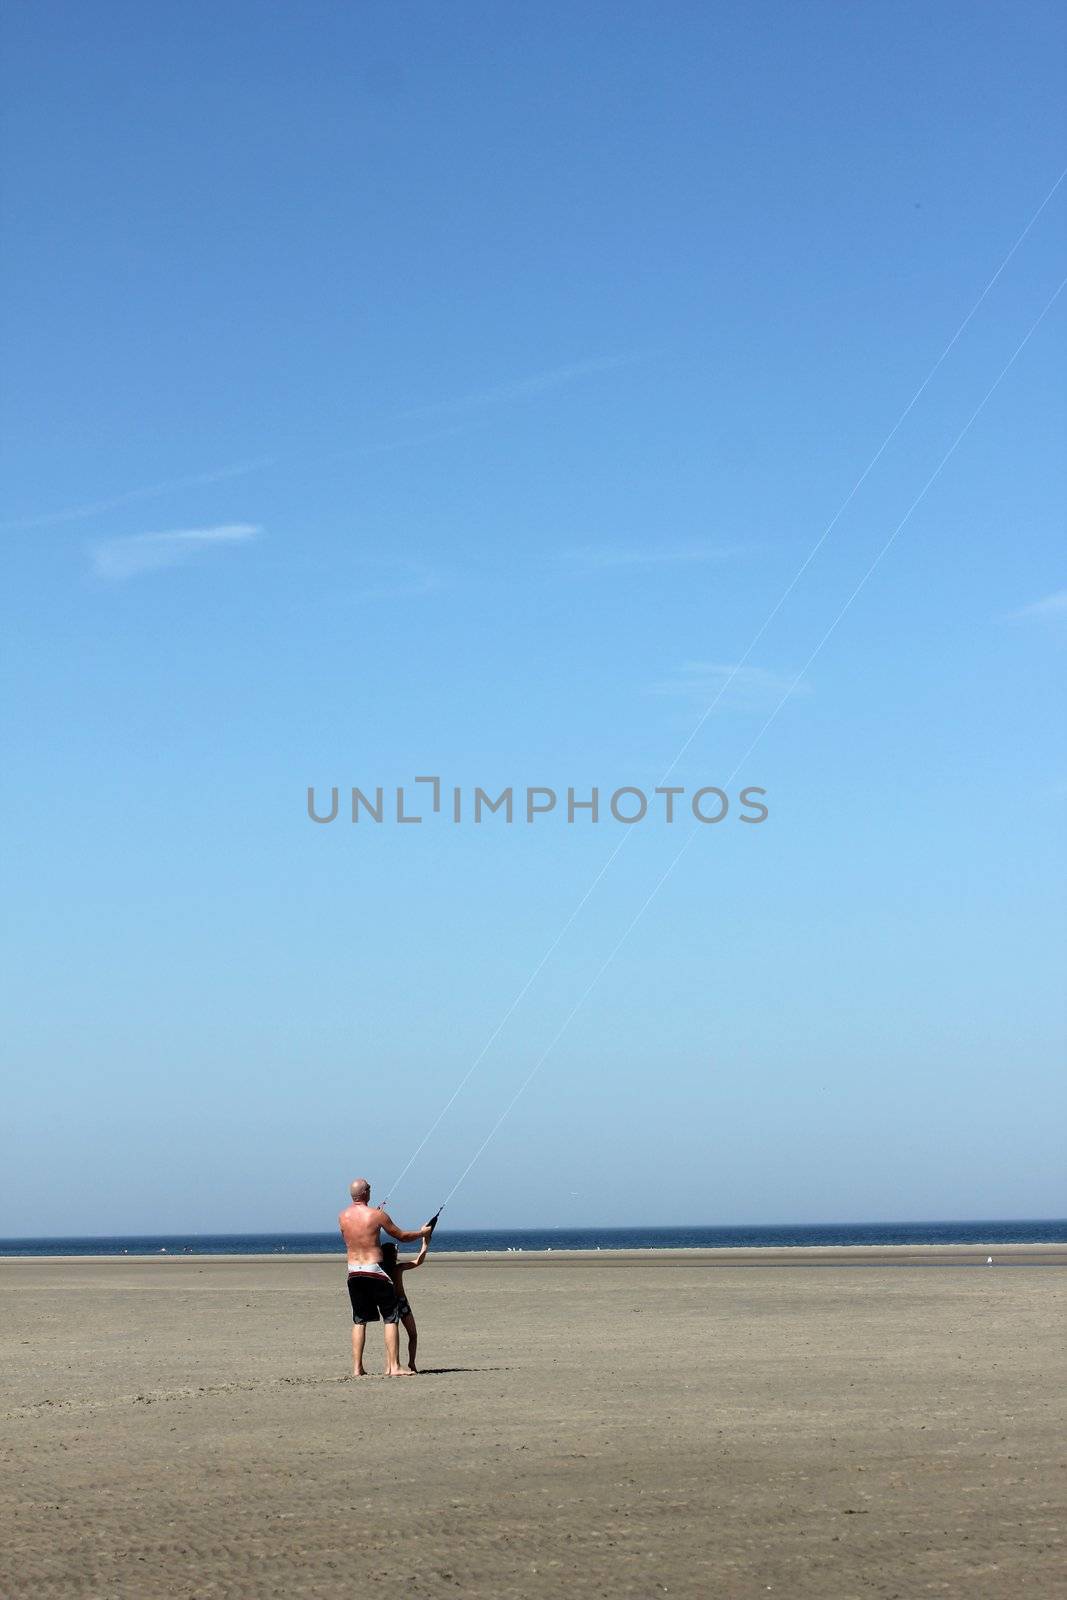 kite flying at the beach by Teka77